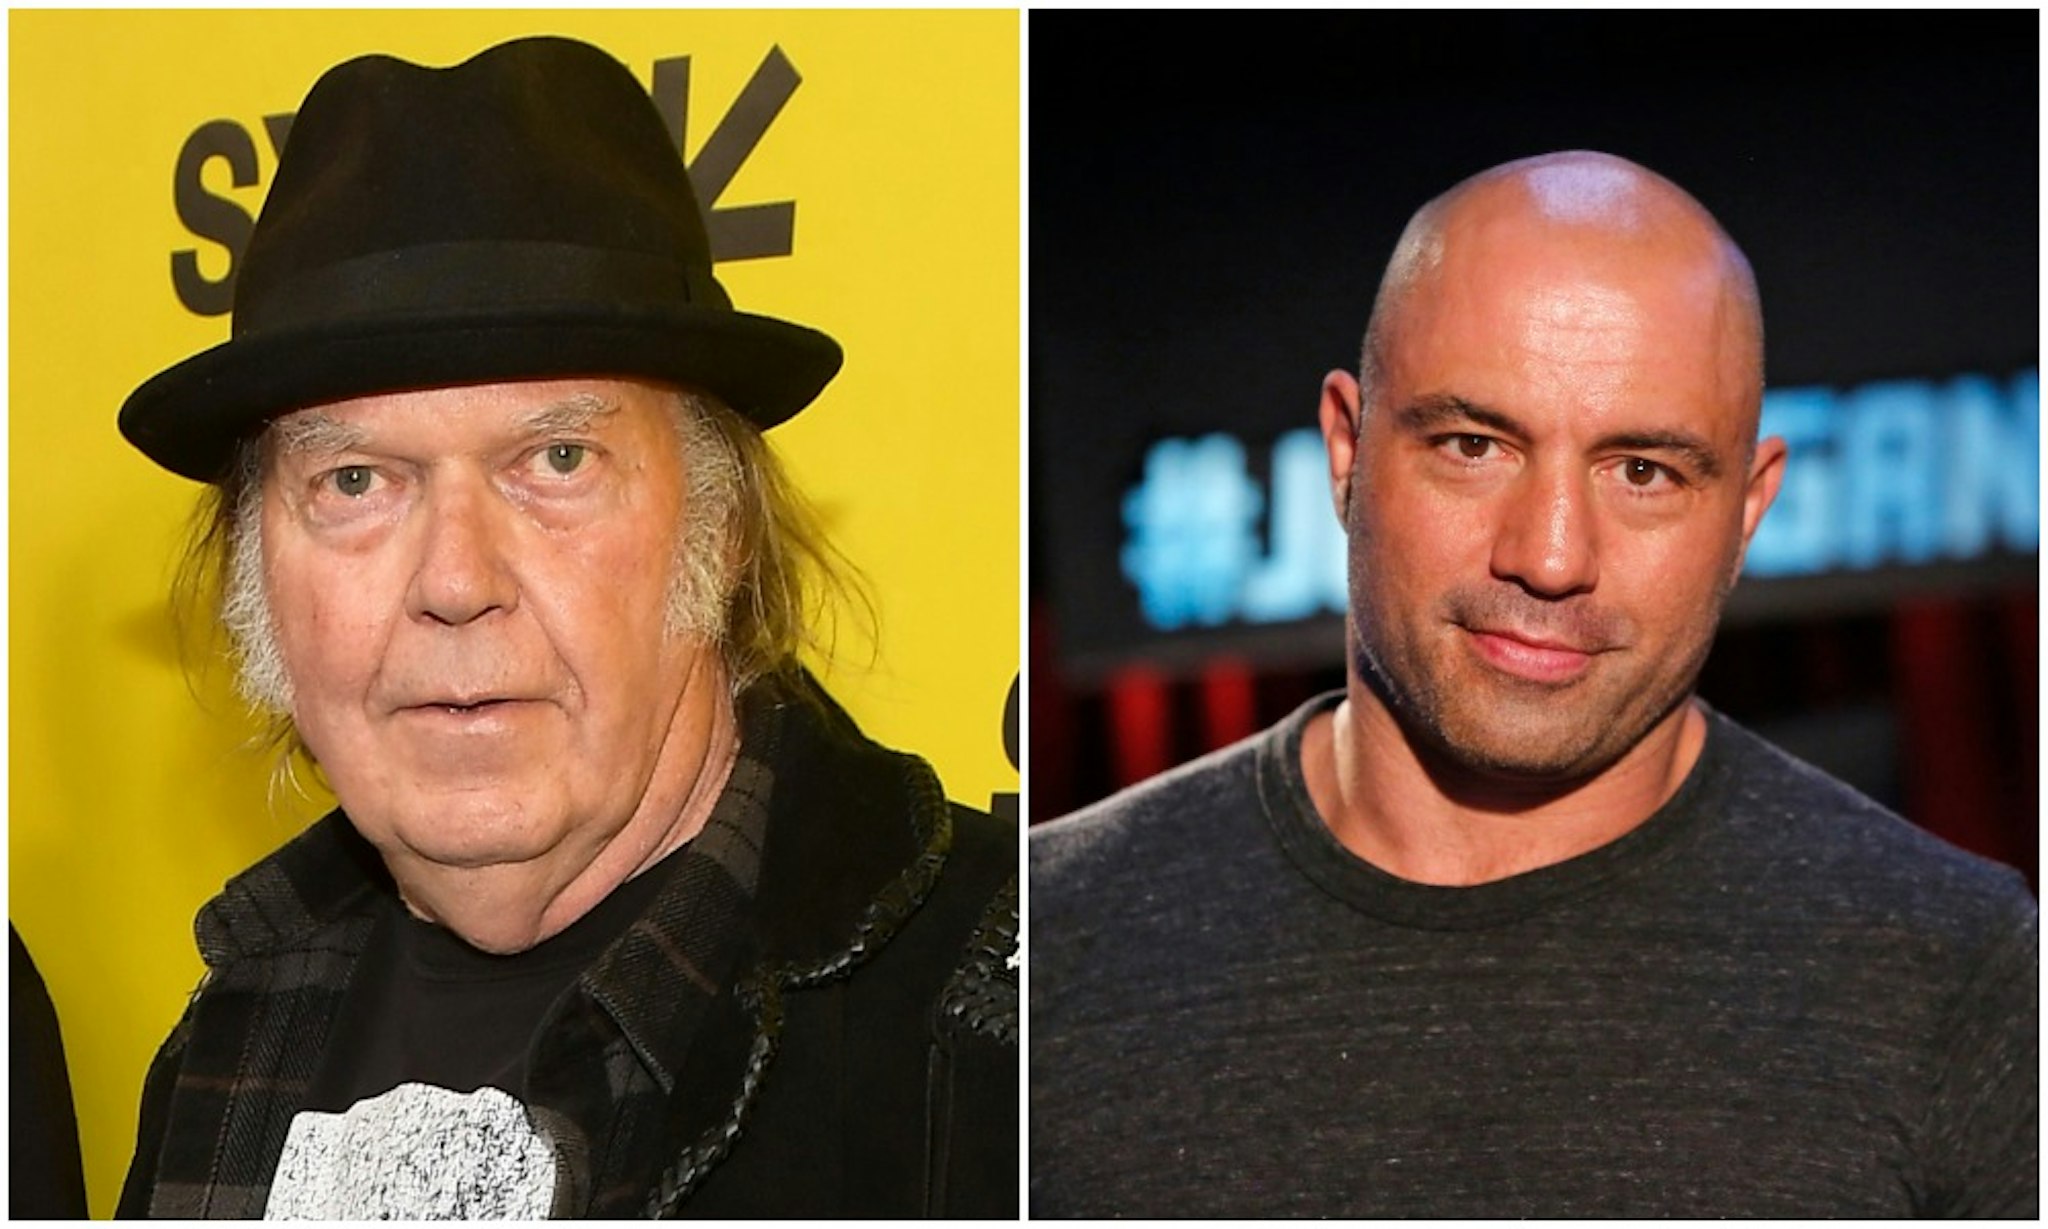 AUSTIN, TX - MARCH 15: Neil Young attend the "Paradox" Premiere 2018 SXSW Conference and Festivals at Paramount Theatre on March 15, 2018 in Austin, Texas. JOE ROGAN QUESTIONS EVERYTHING -- Season:1 -- Pictured: Joe Rogan --